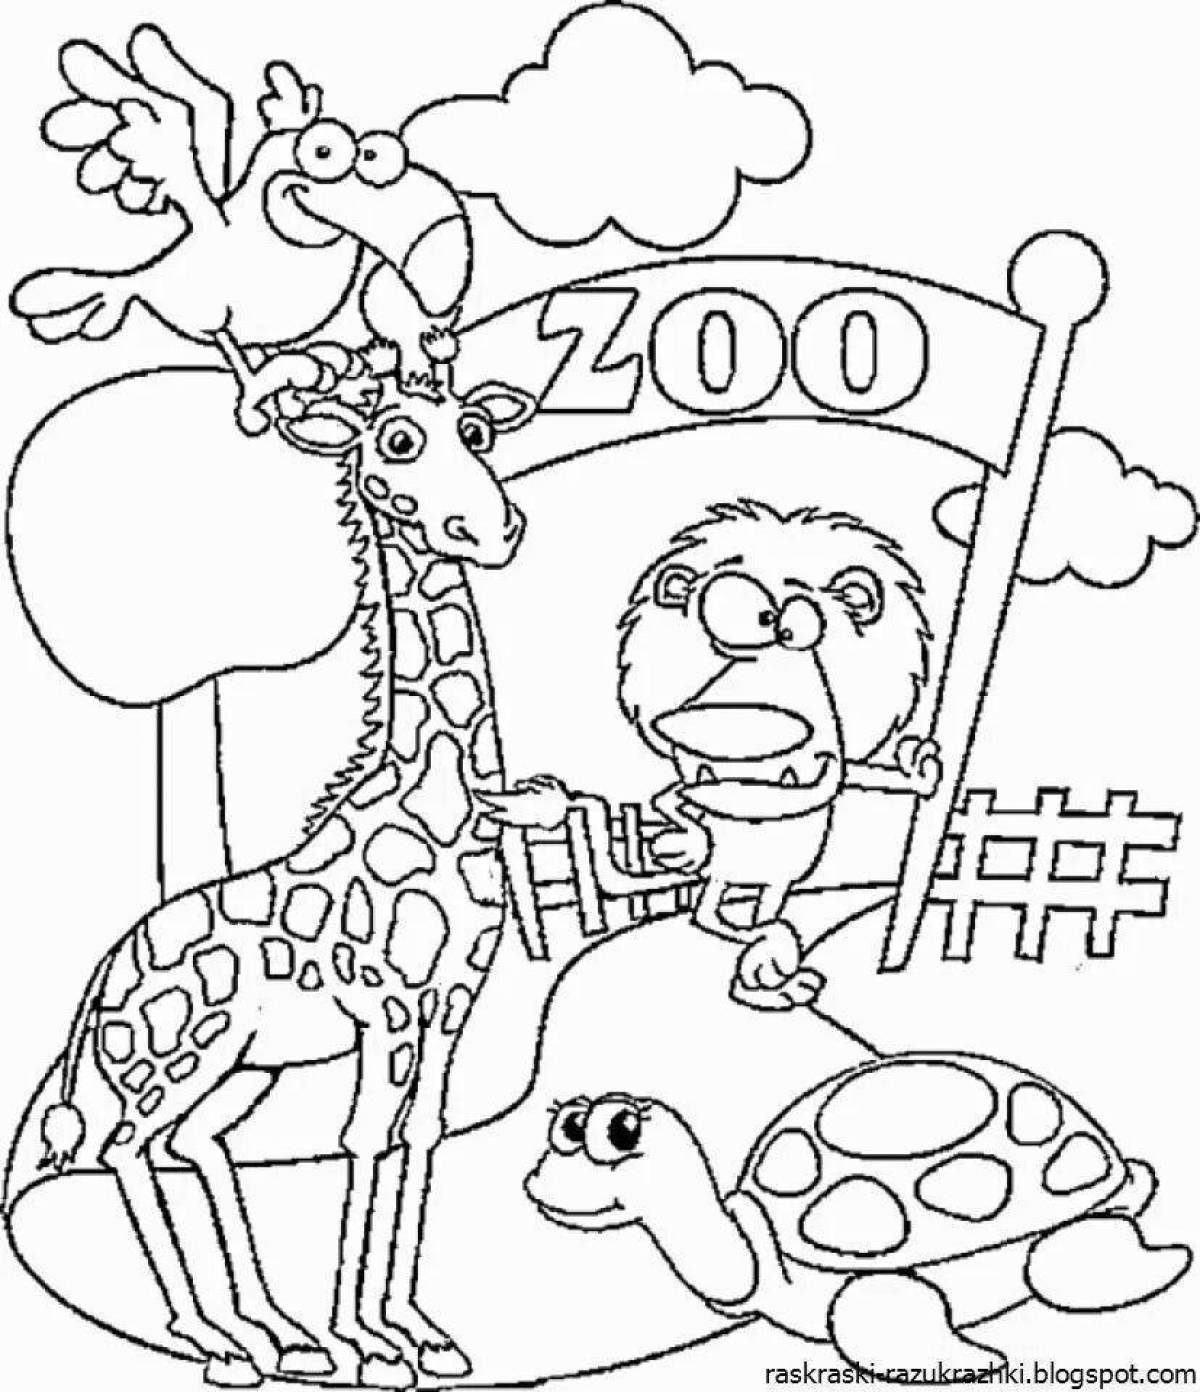 Bright coloring zoo for children 5-6 years old